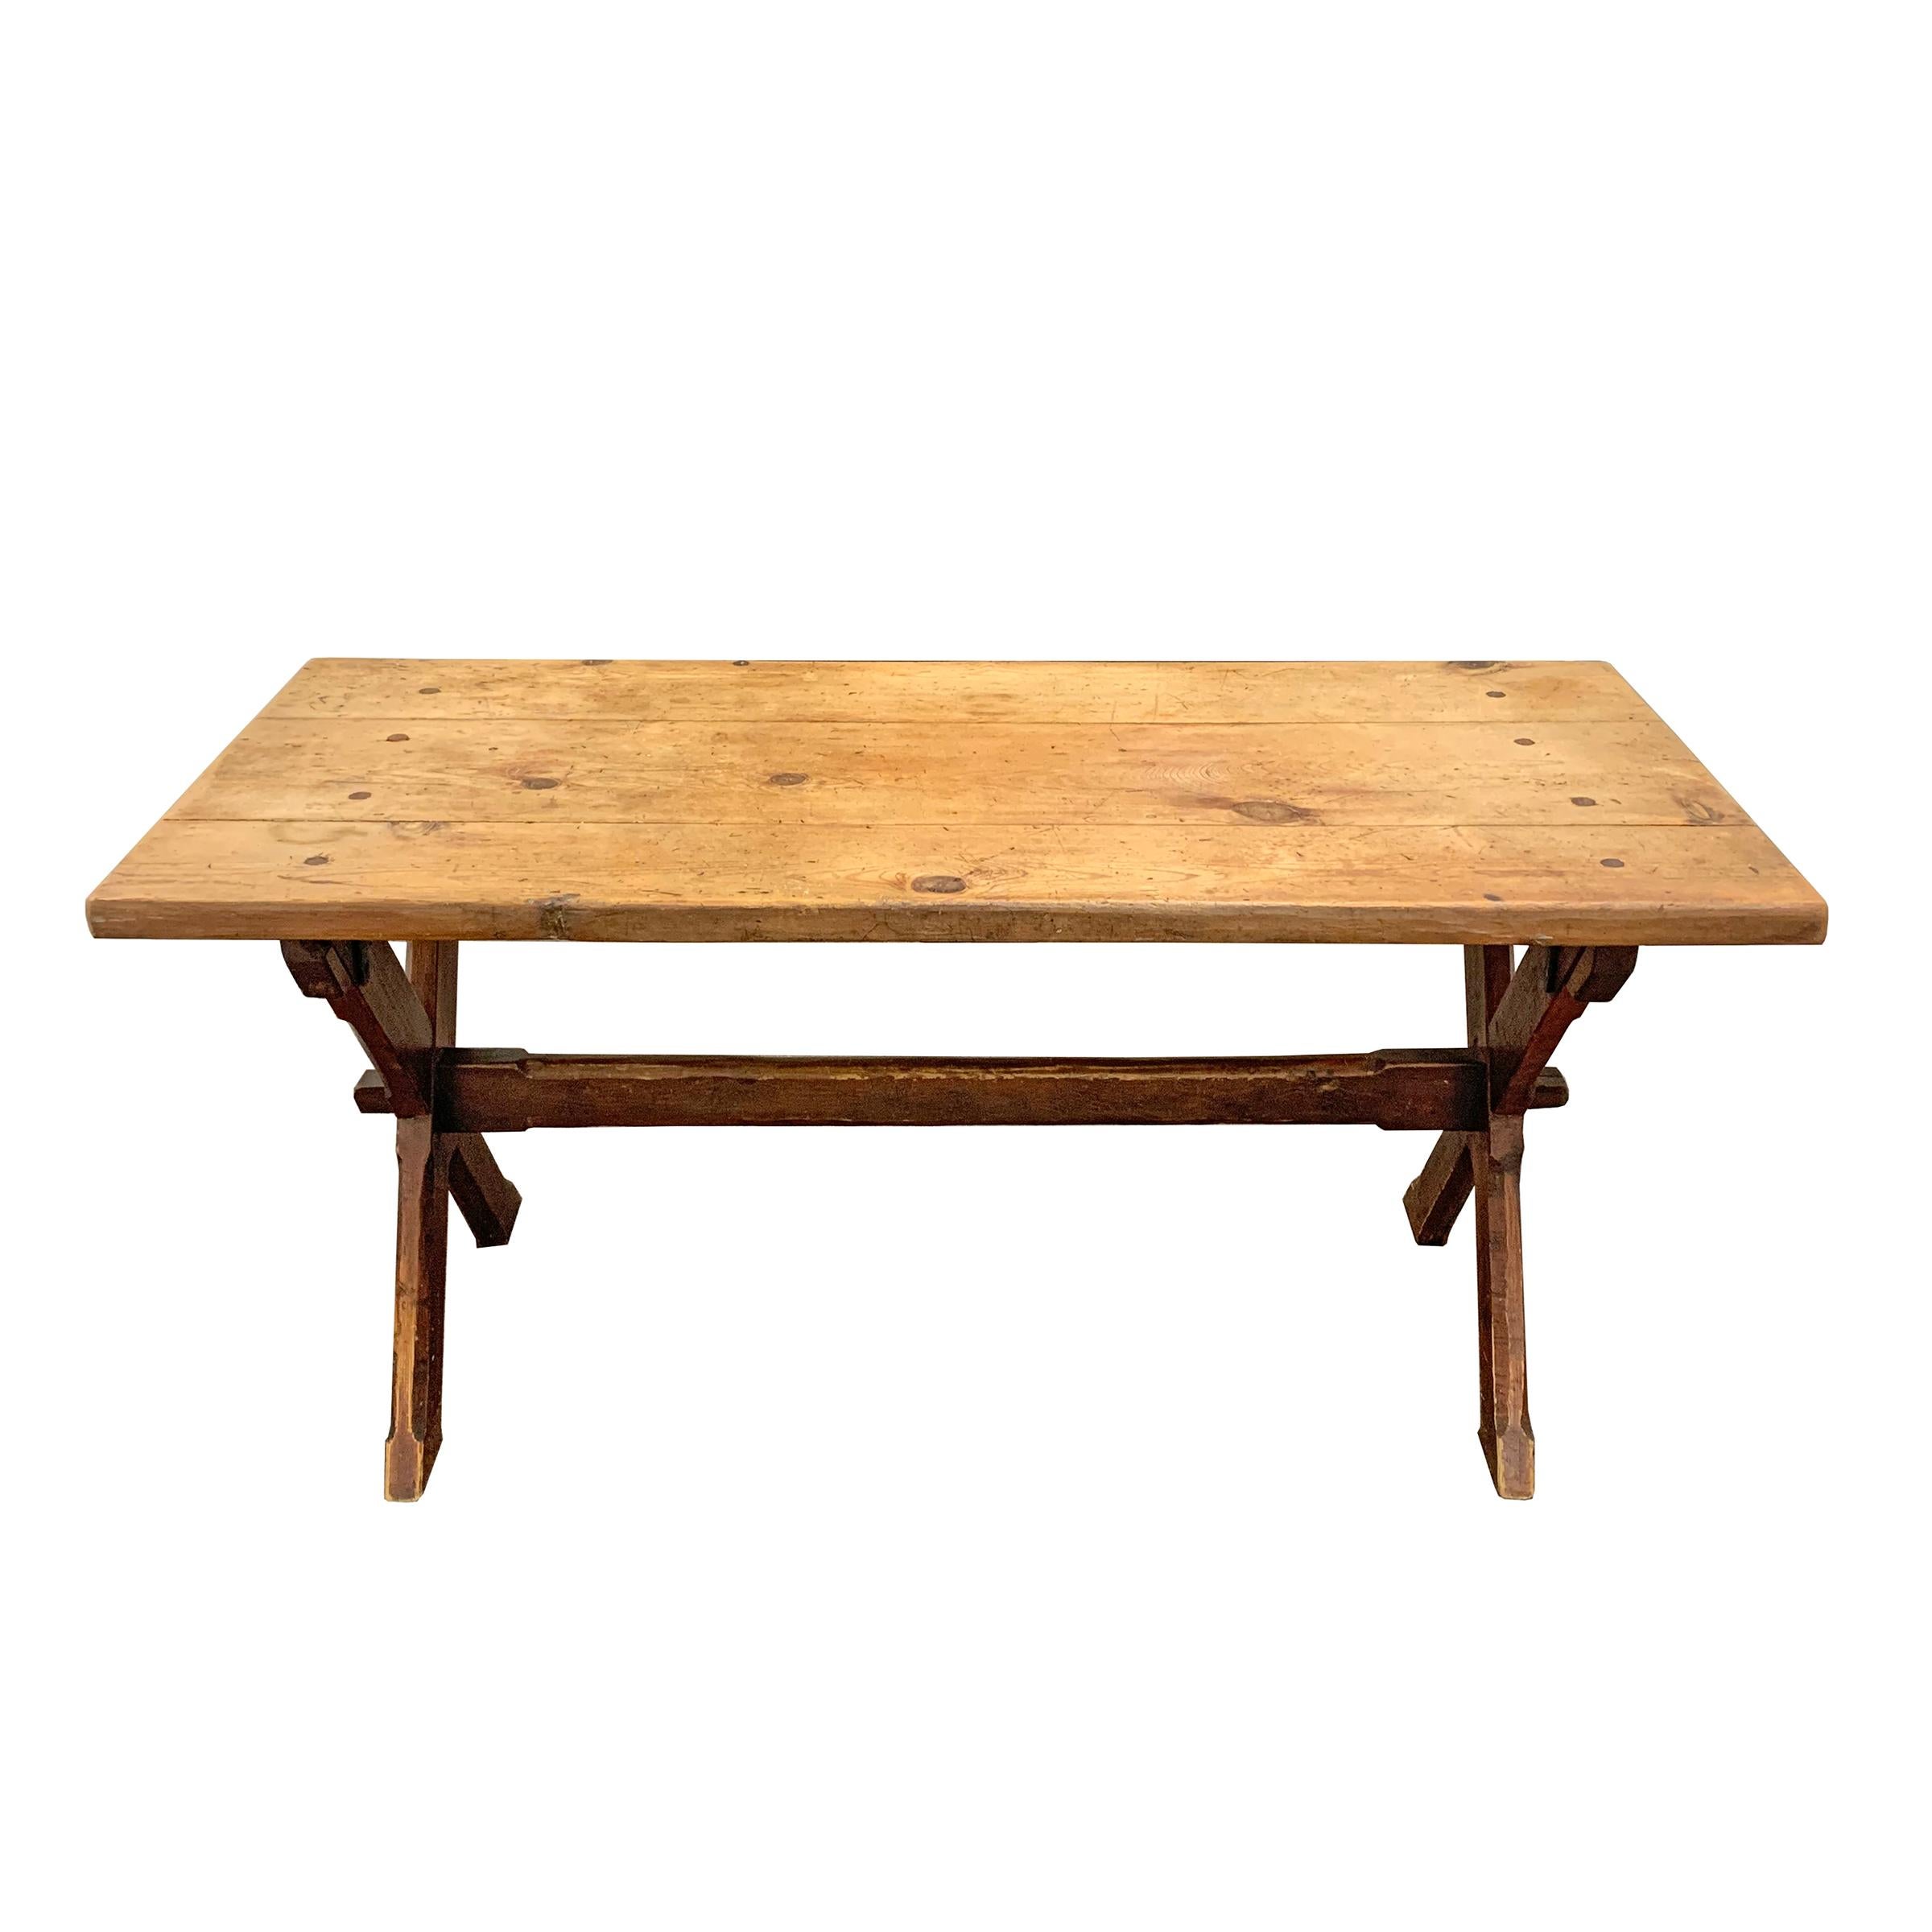 Country 19th Century American Trestle Table